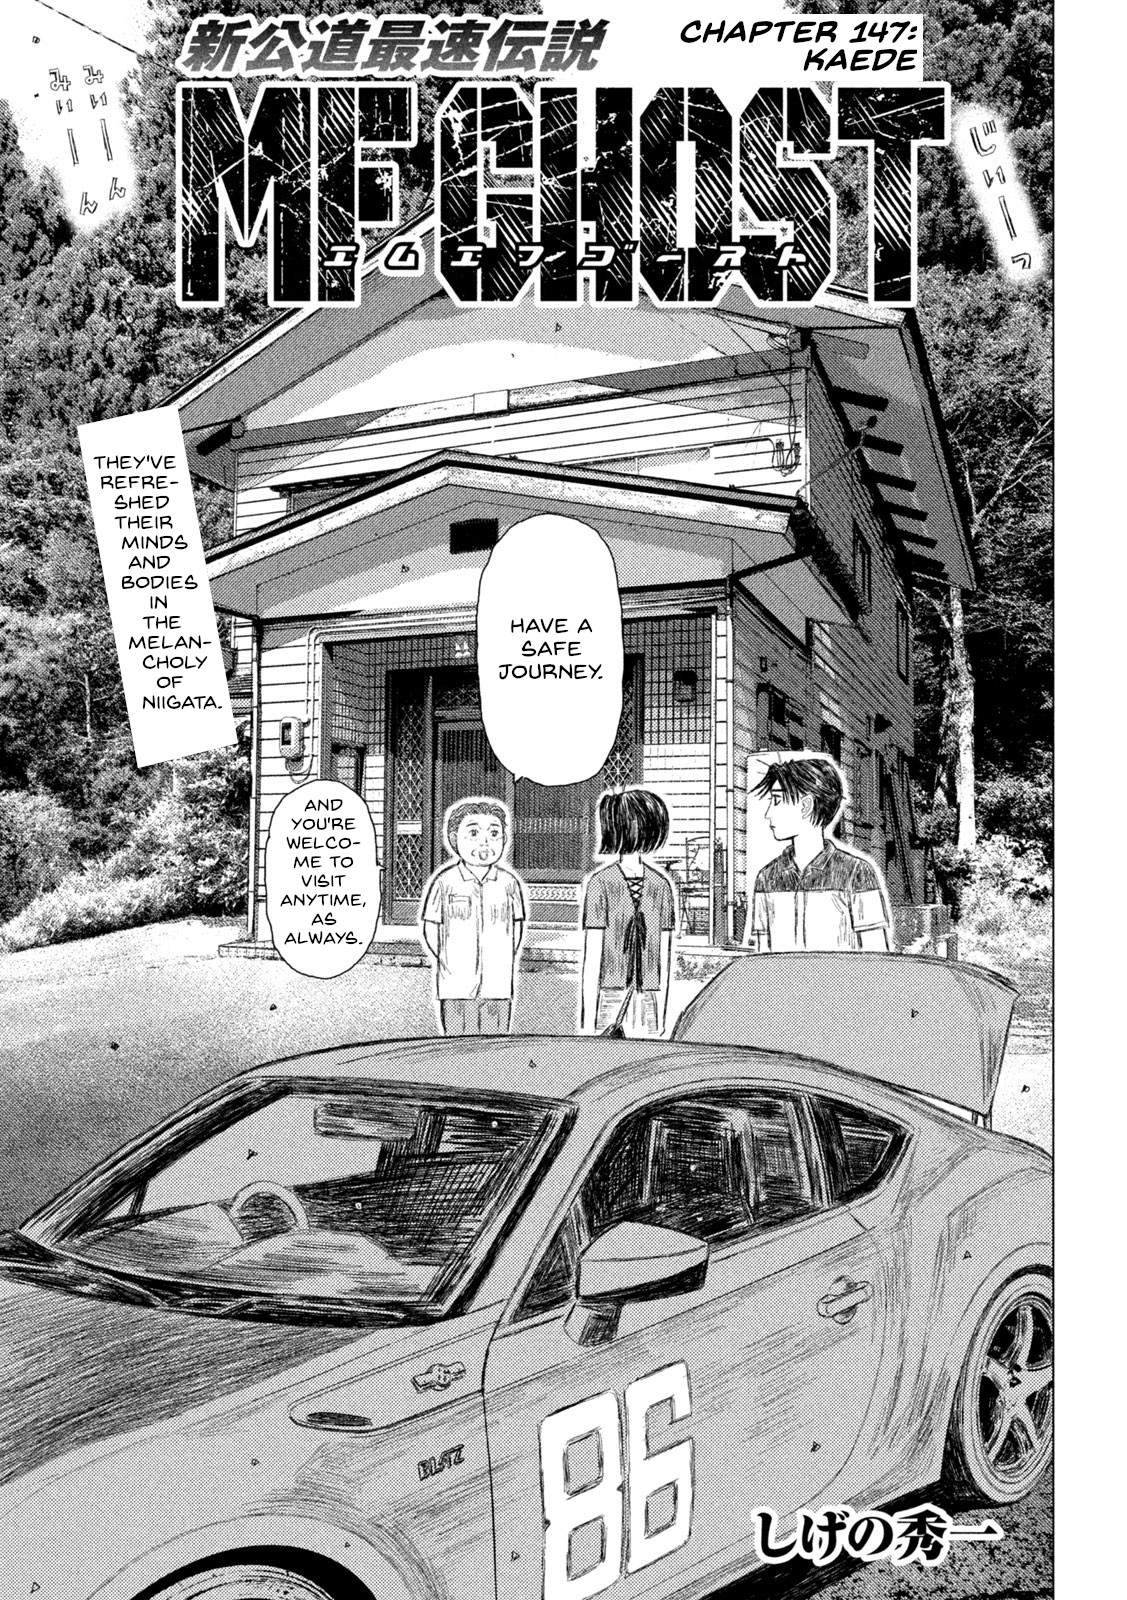 Mf Ghost Vol.13 Chapter 147